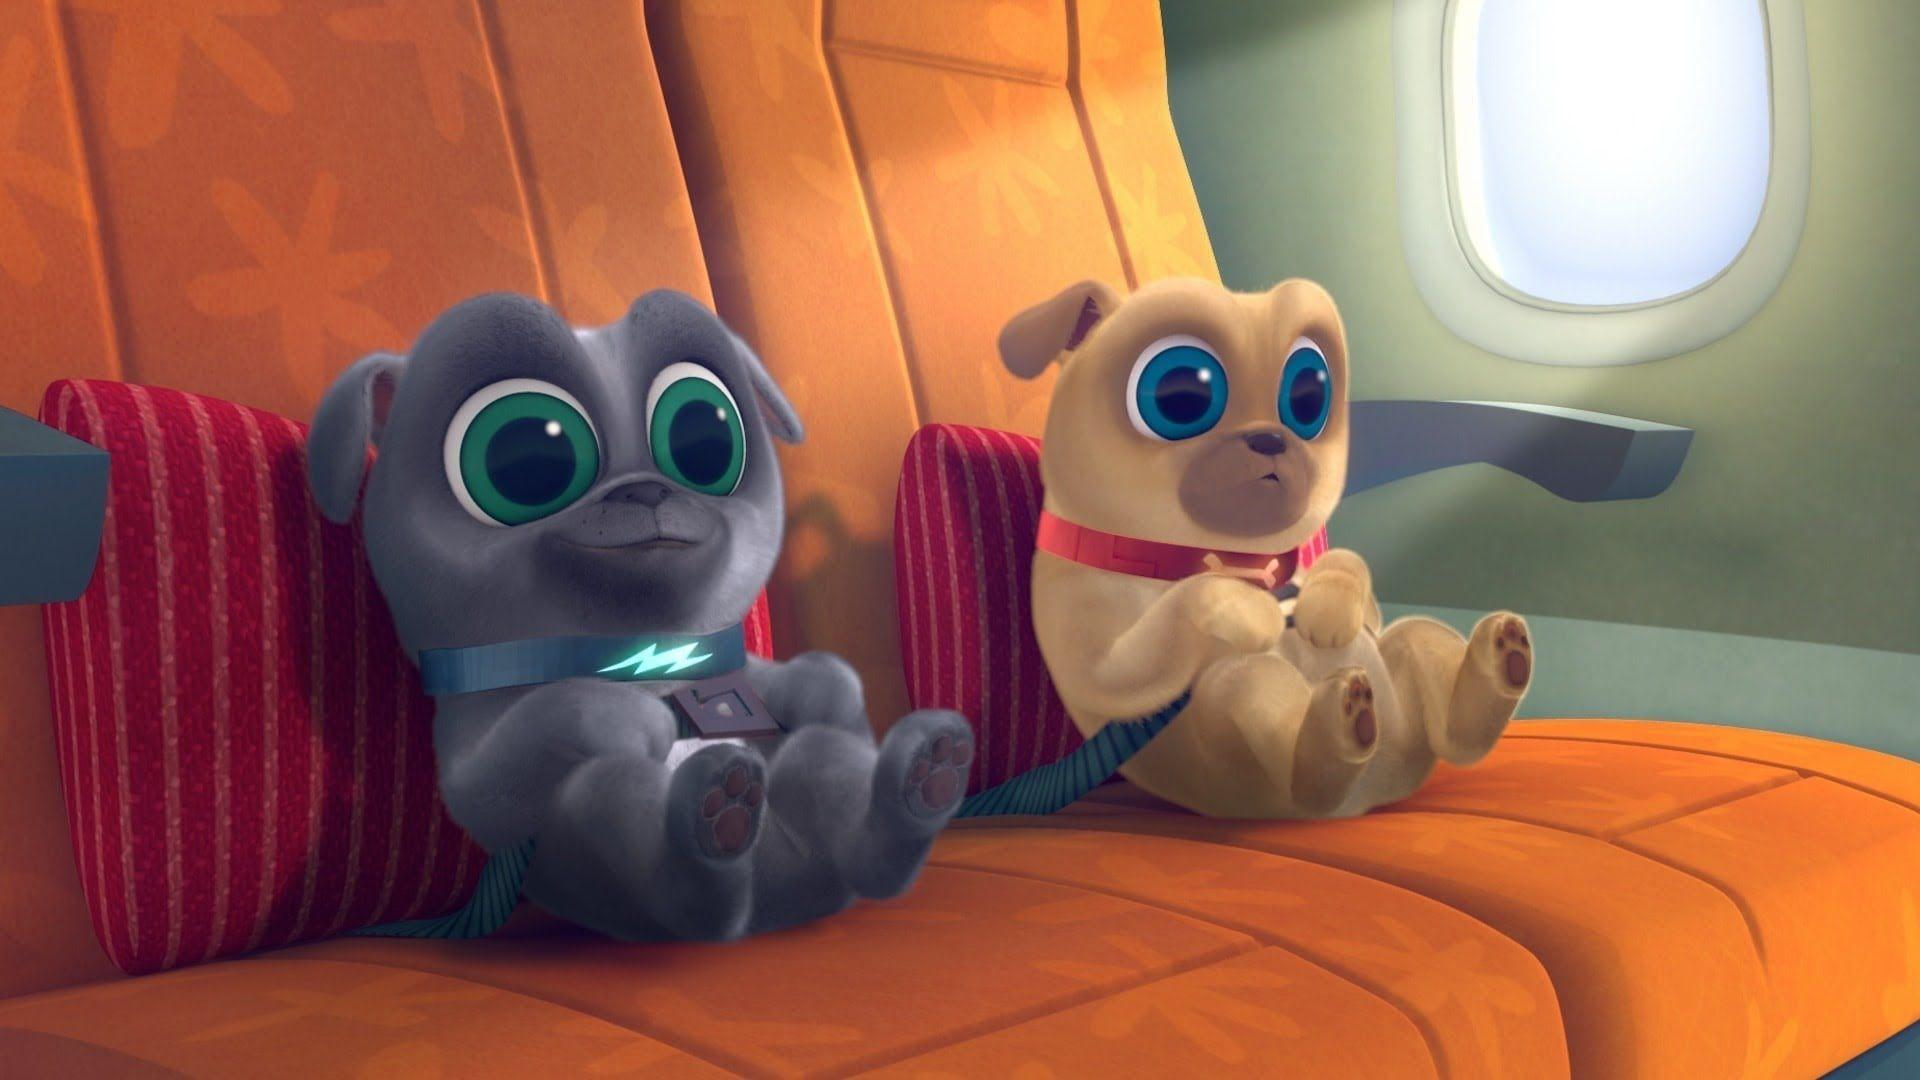 Puppy Dog Pals Wallpapers - Wallpaper Cave